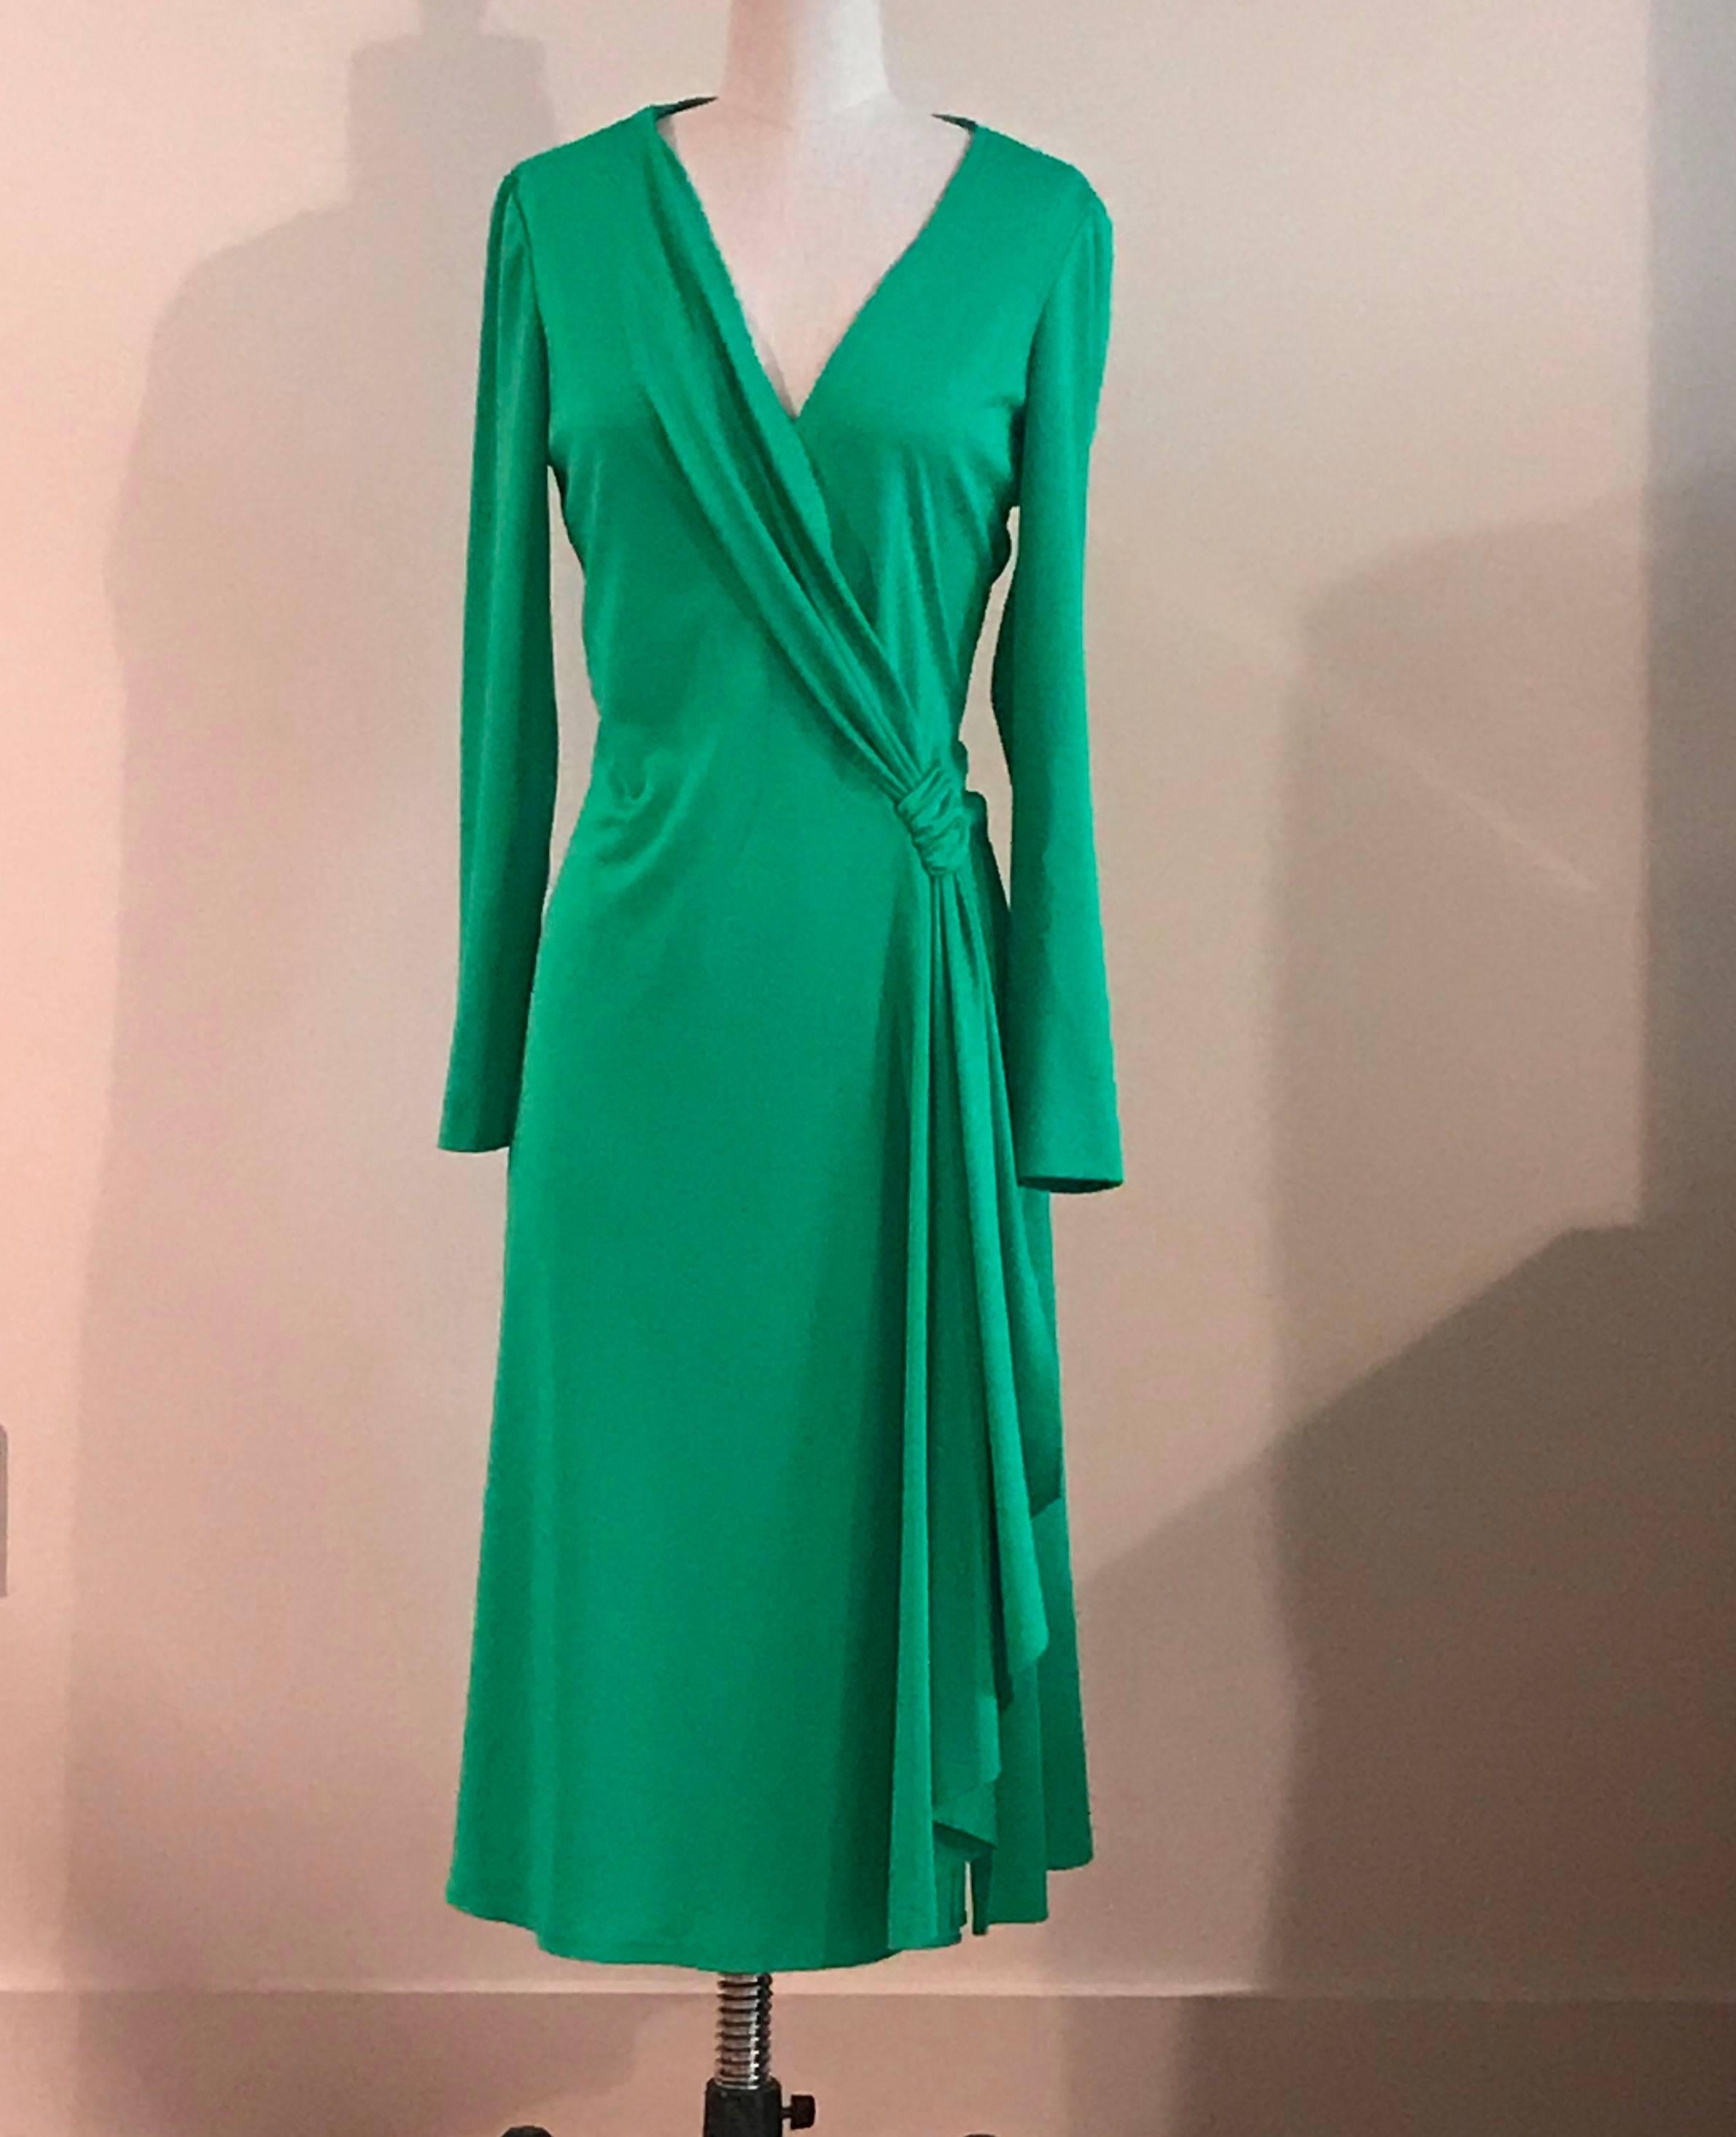 Stephen Burrows vintage 1970s long sleeve green jersey dress with drape detail at front. Signature lettuce edge at hem and drape. Pulls on overhead, no closure.

No content label, feels like mid weight synthetic jersey.

No size tag, best fits S/M,